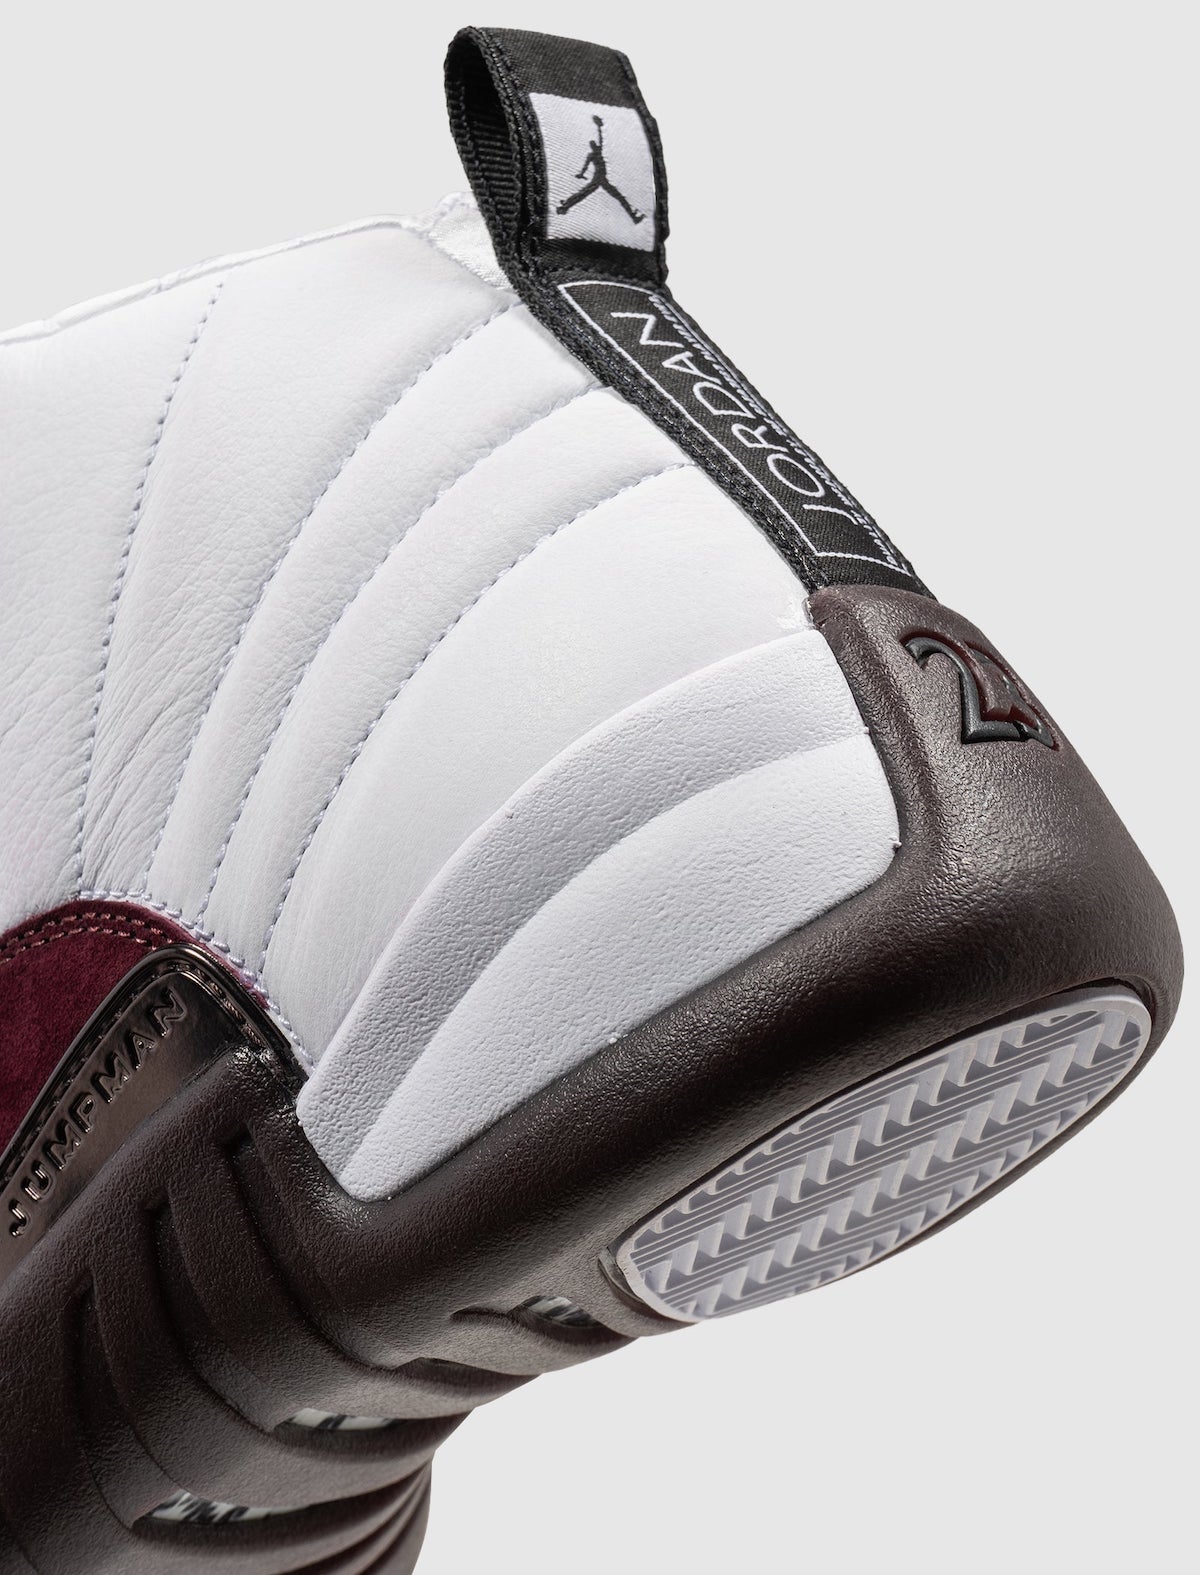 Remastered to a tee, the 2016 Air Jordan 12 “Playoff” release